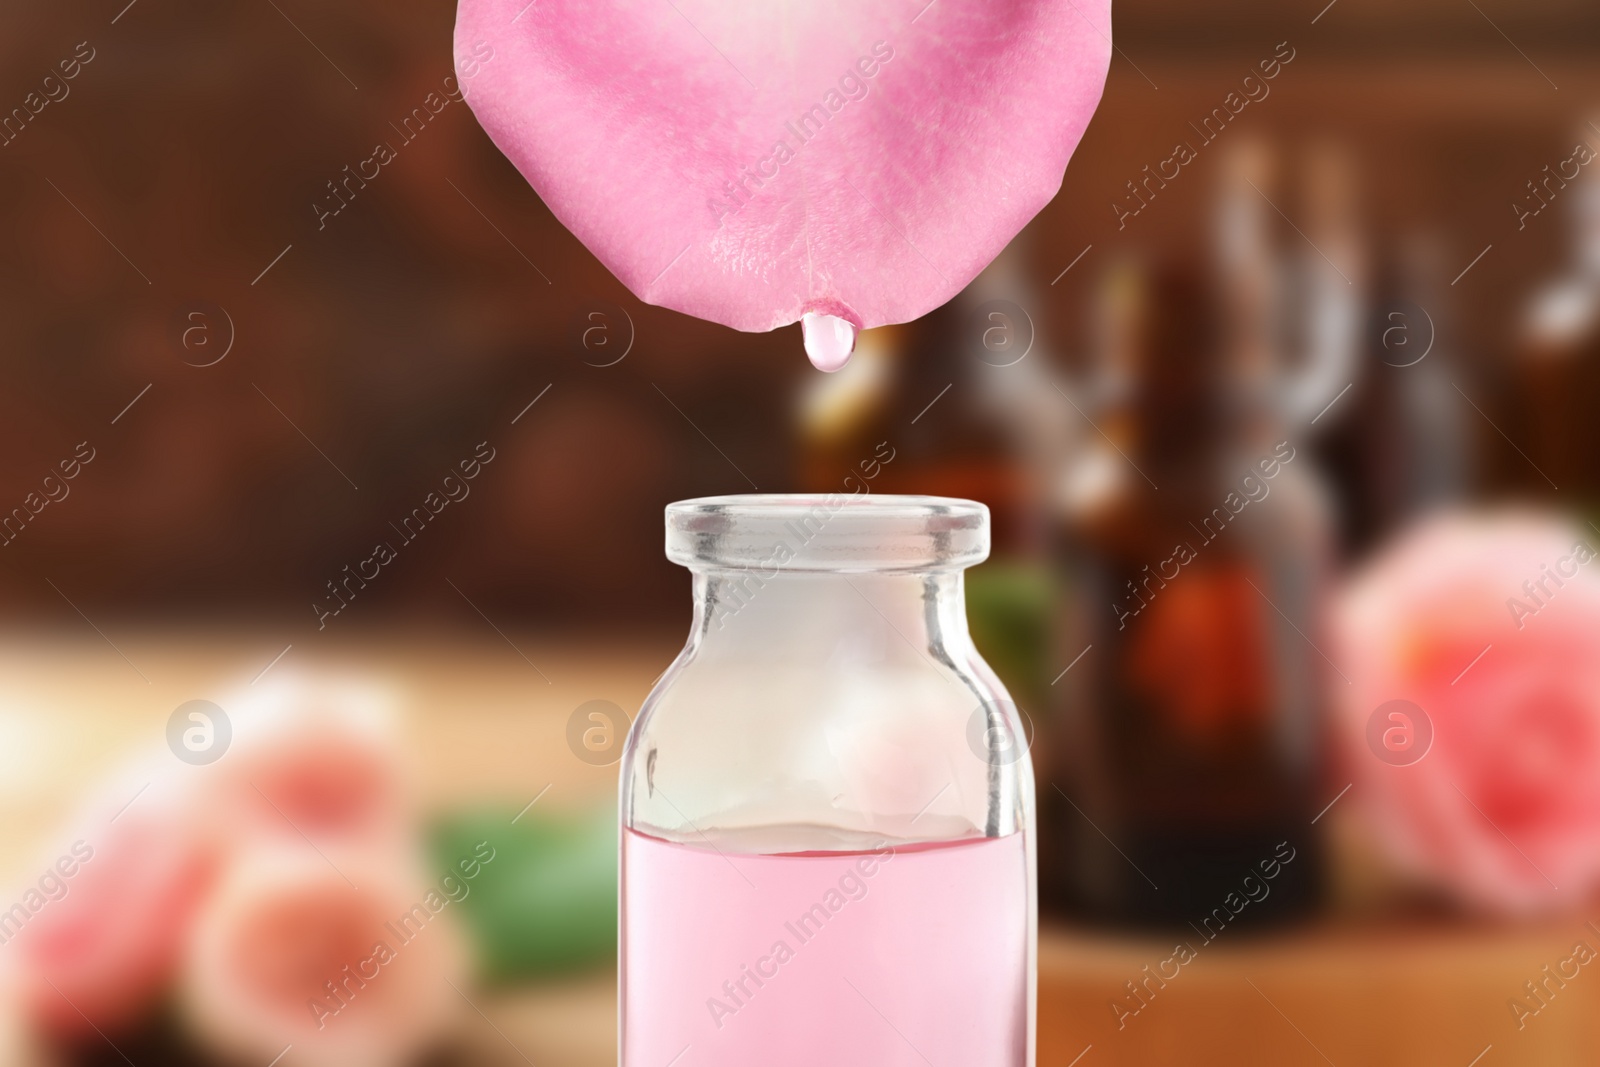 Image of Essential oil dripping from petal into bottle against blurred background 